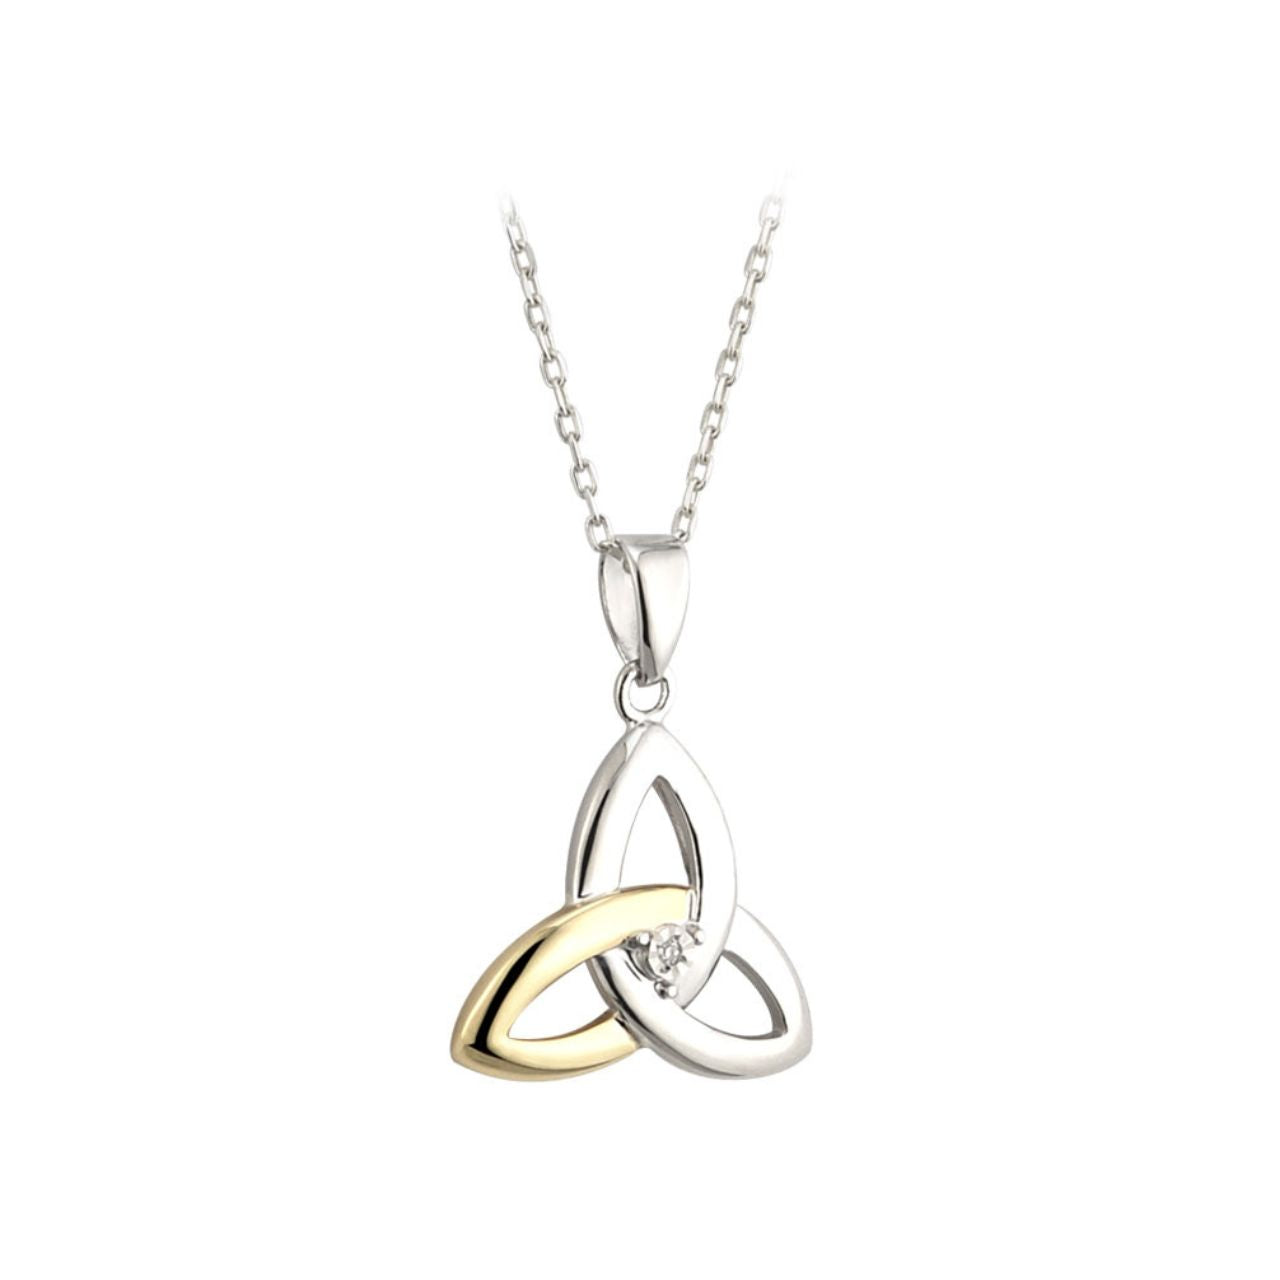 Our beautiful Trinity Knot necklace has been crafted in sterling silver and 10 karat gold, and embellished with a stunning diamond gemstone. The Trinity Knot symbolises eternal love, with no beginning and no end. This piece has been Irish hallmarked in Dublin Castle and would make a perfect gift for someone special.